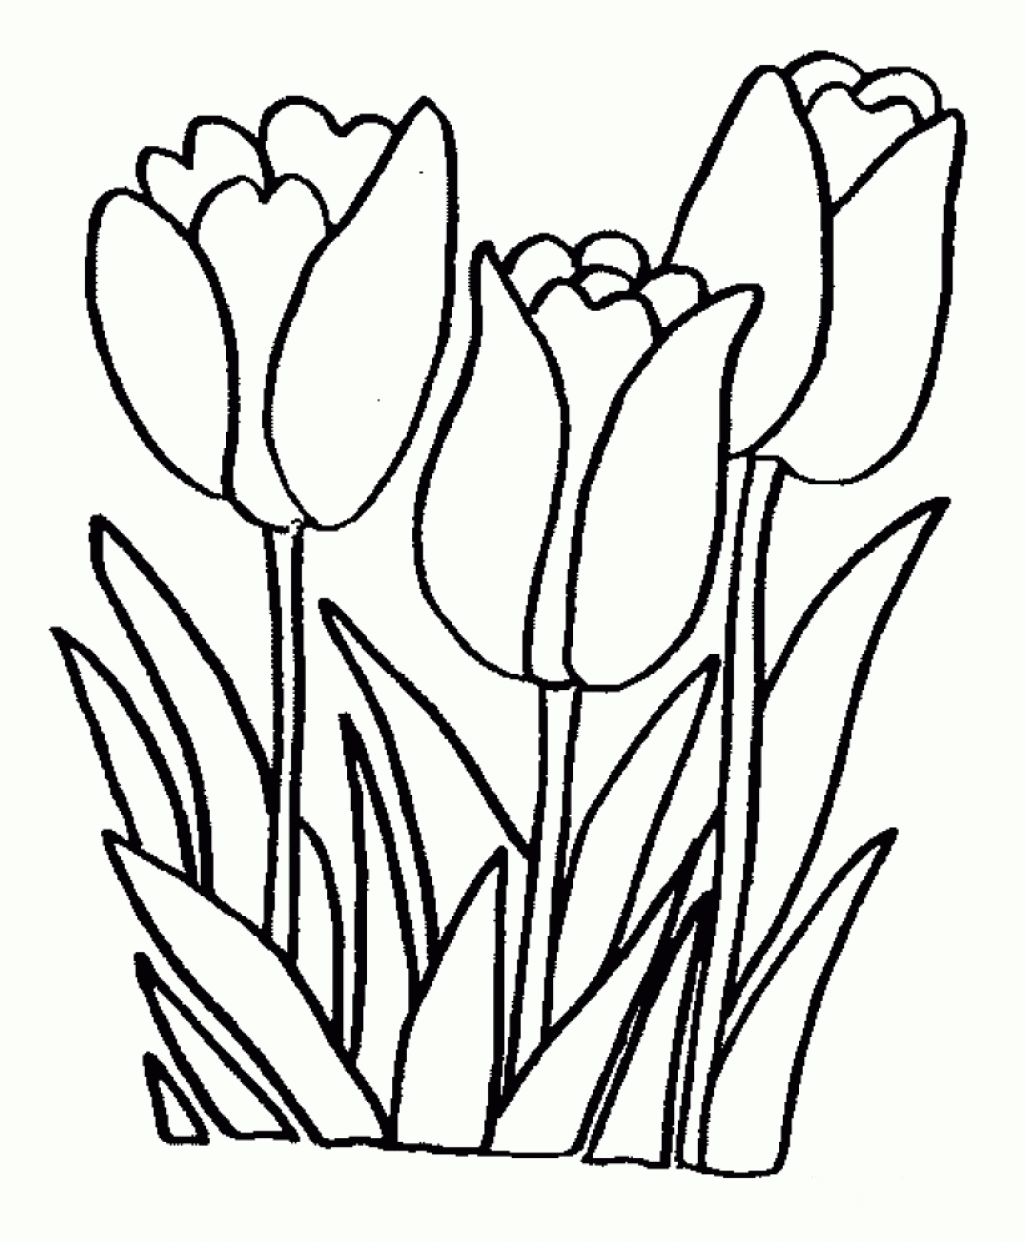 Flower Garden Coloring Pages Flowers Coloring Sheets Free Coloring